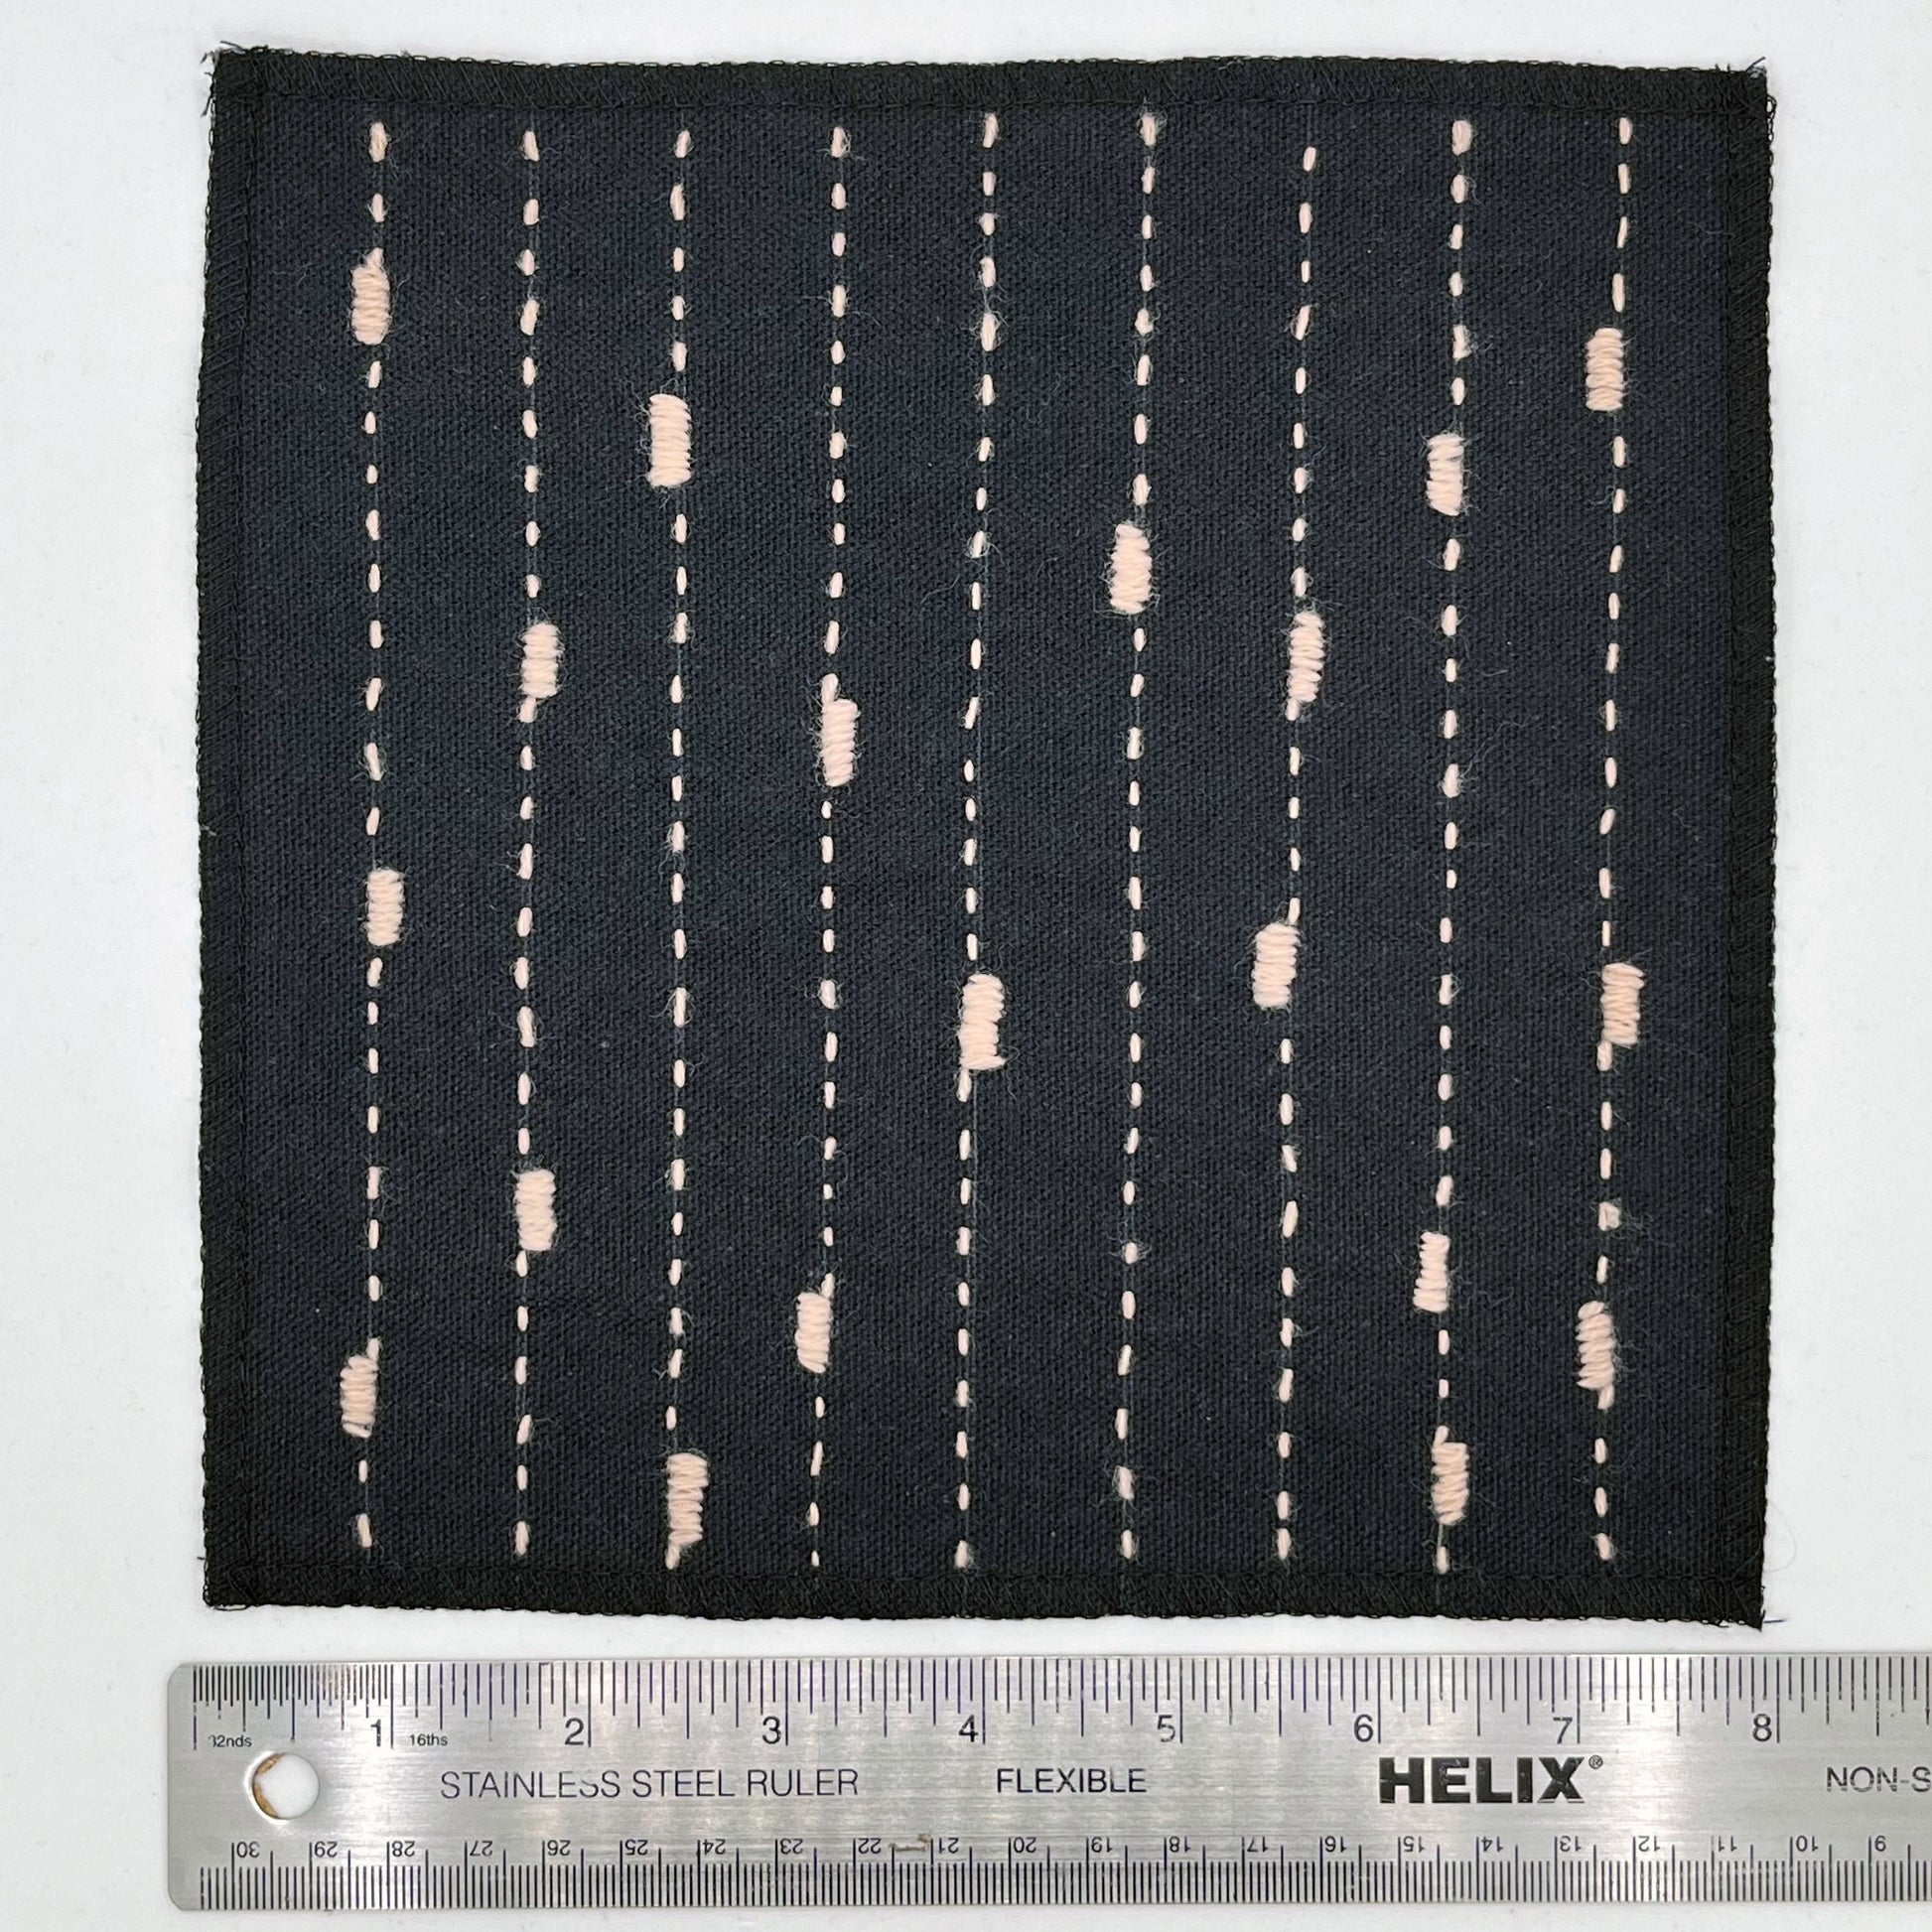 a square patch made out of black canvas, handstitched with peach running stitches with randomly placed small rectangles made of stitches running the other direction, with overlocked edges, on a white background next to a ruler to show width of 8 in